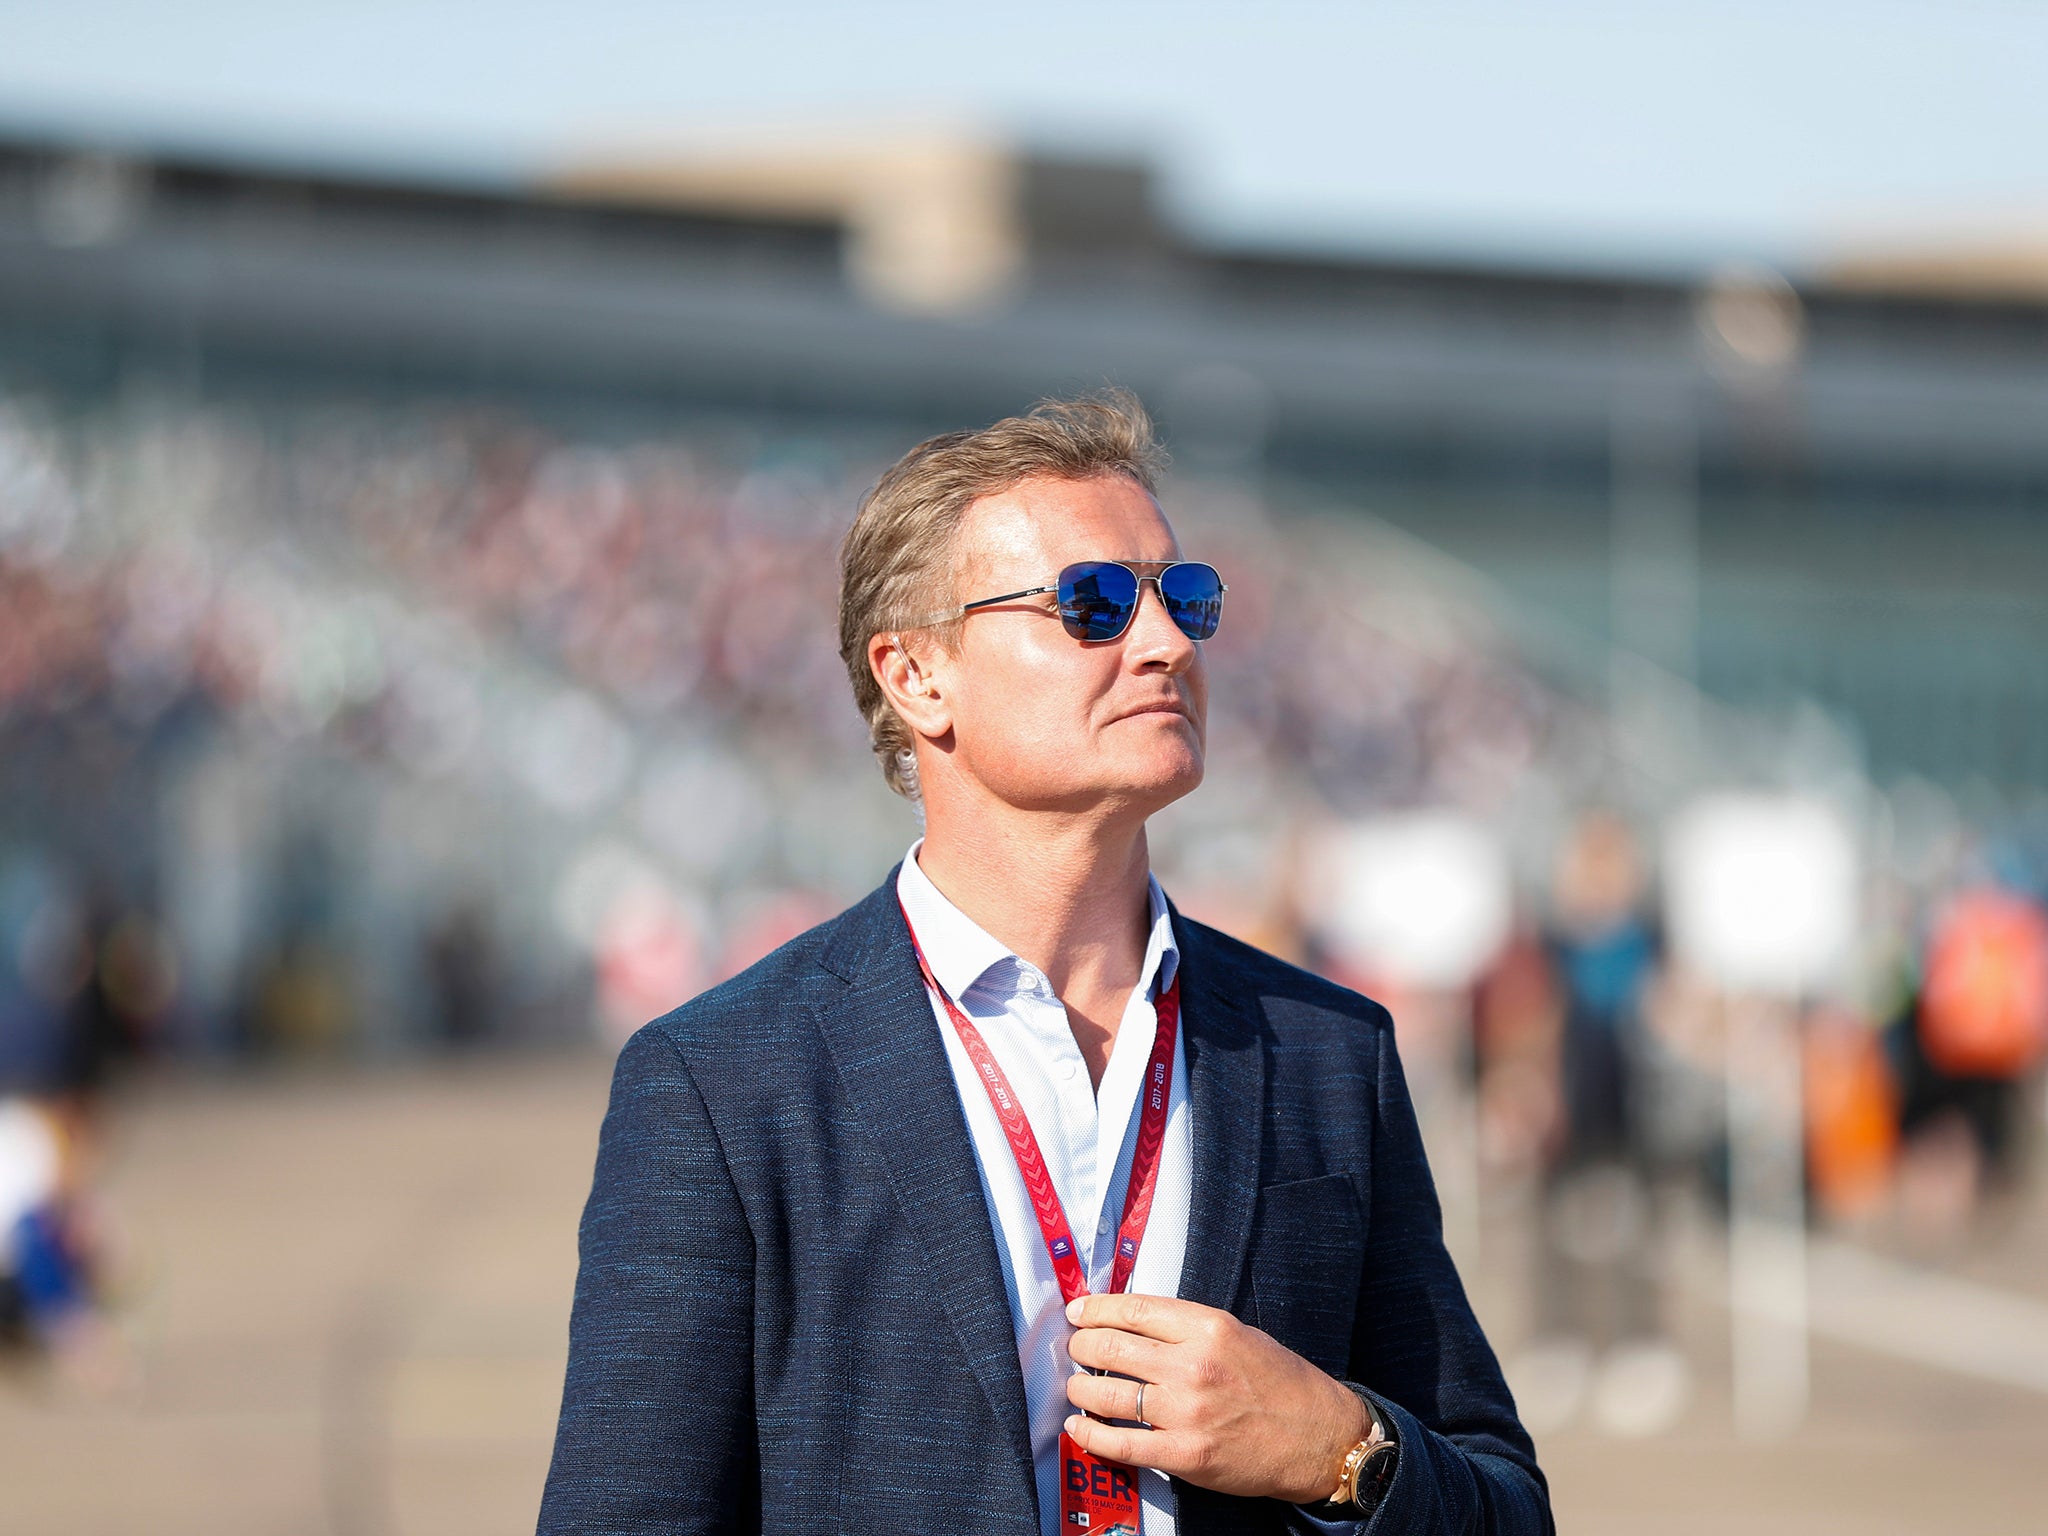 David Coulthard announced the 18 successful drivers who will compete in the W Series